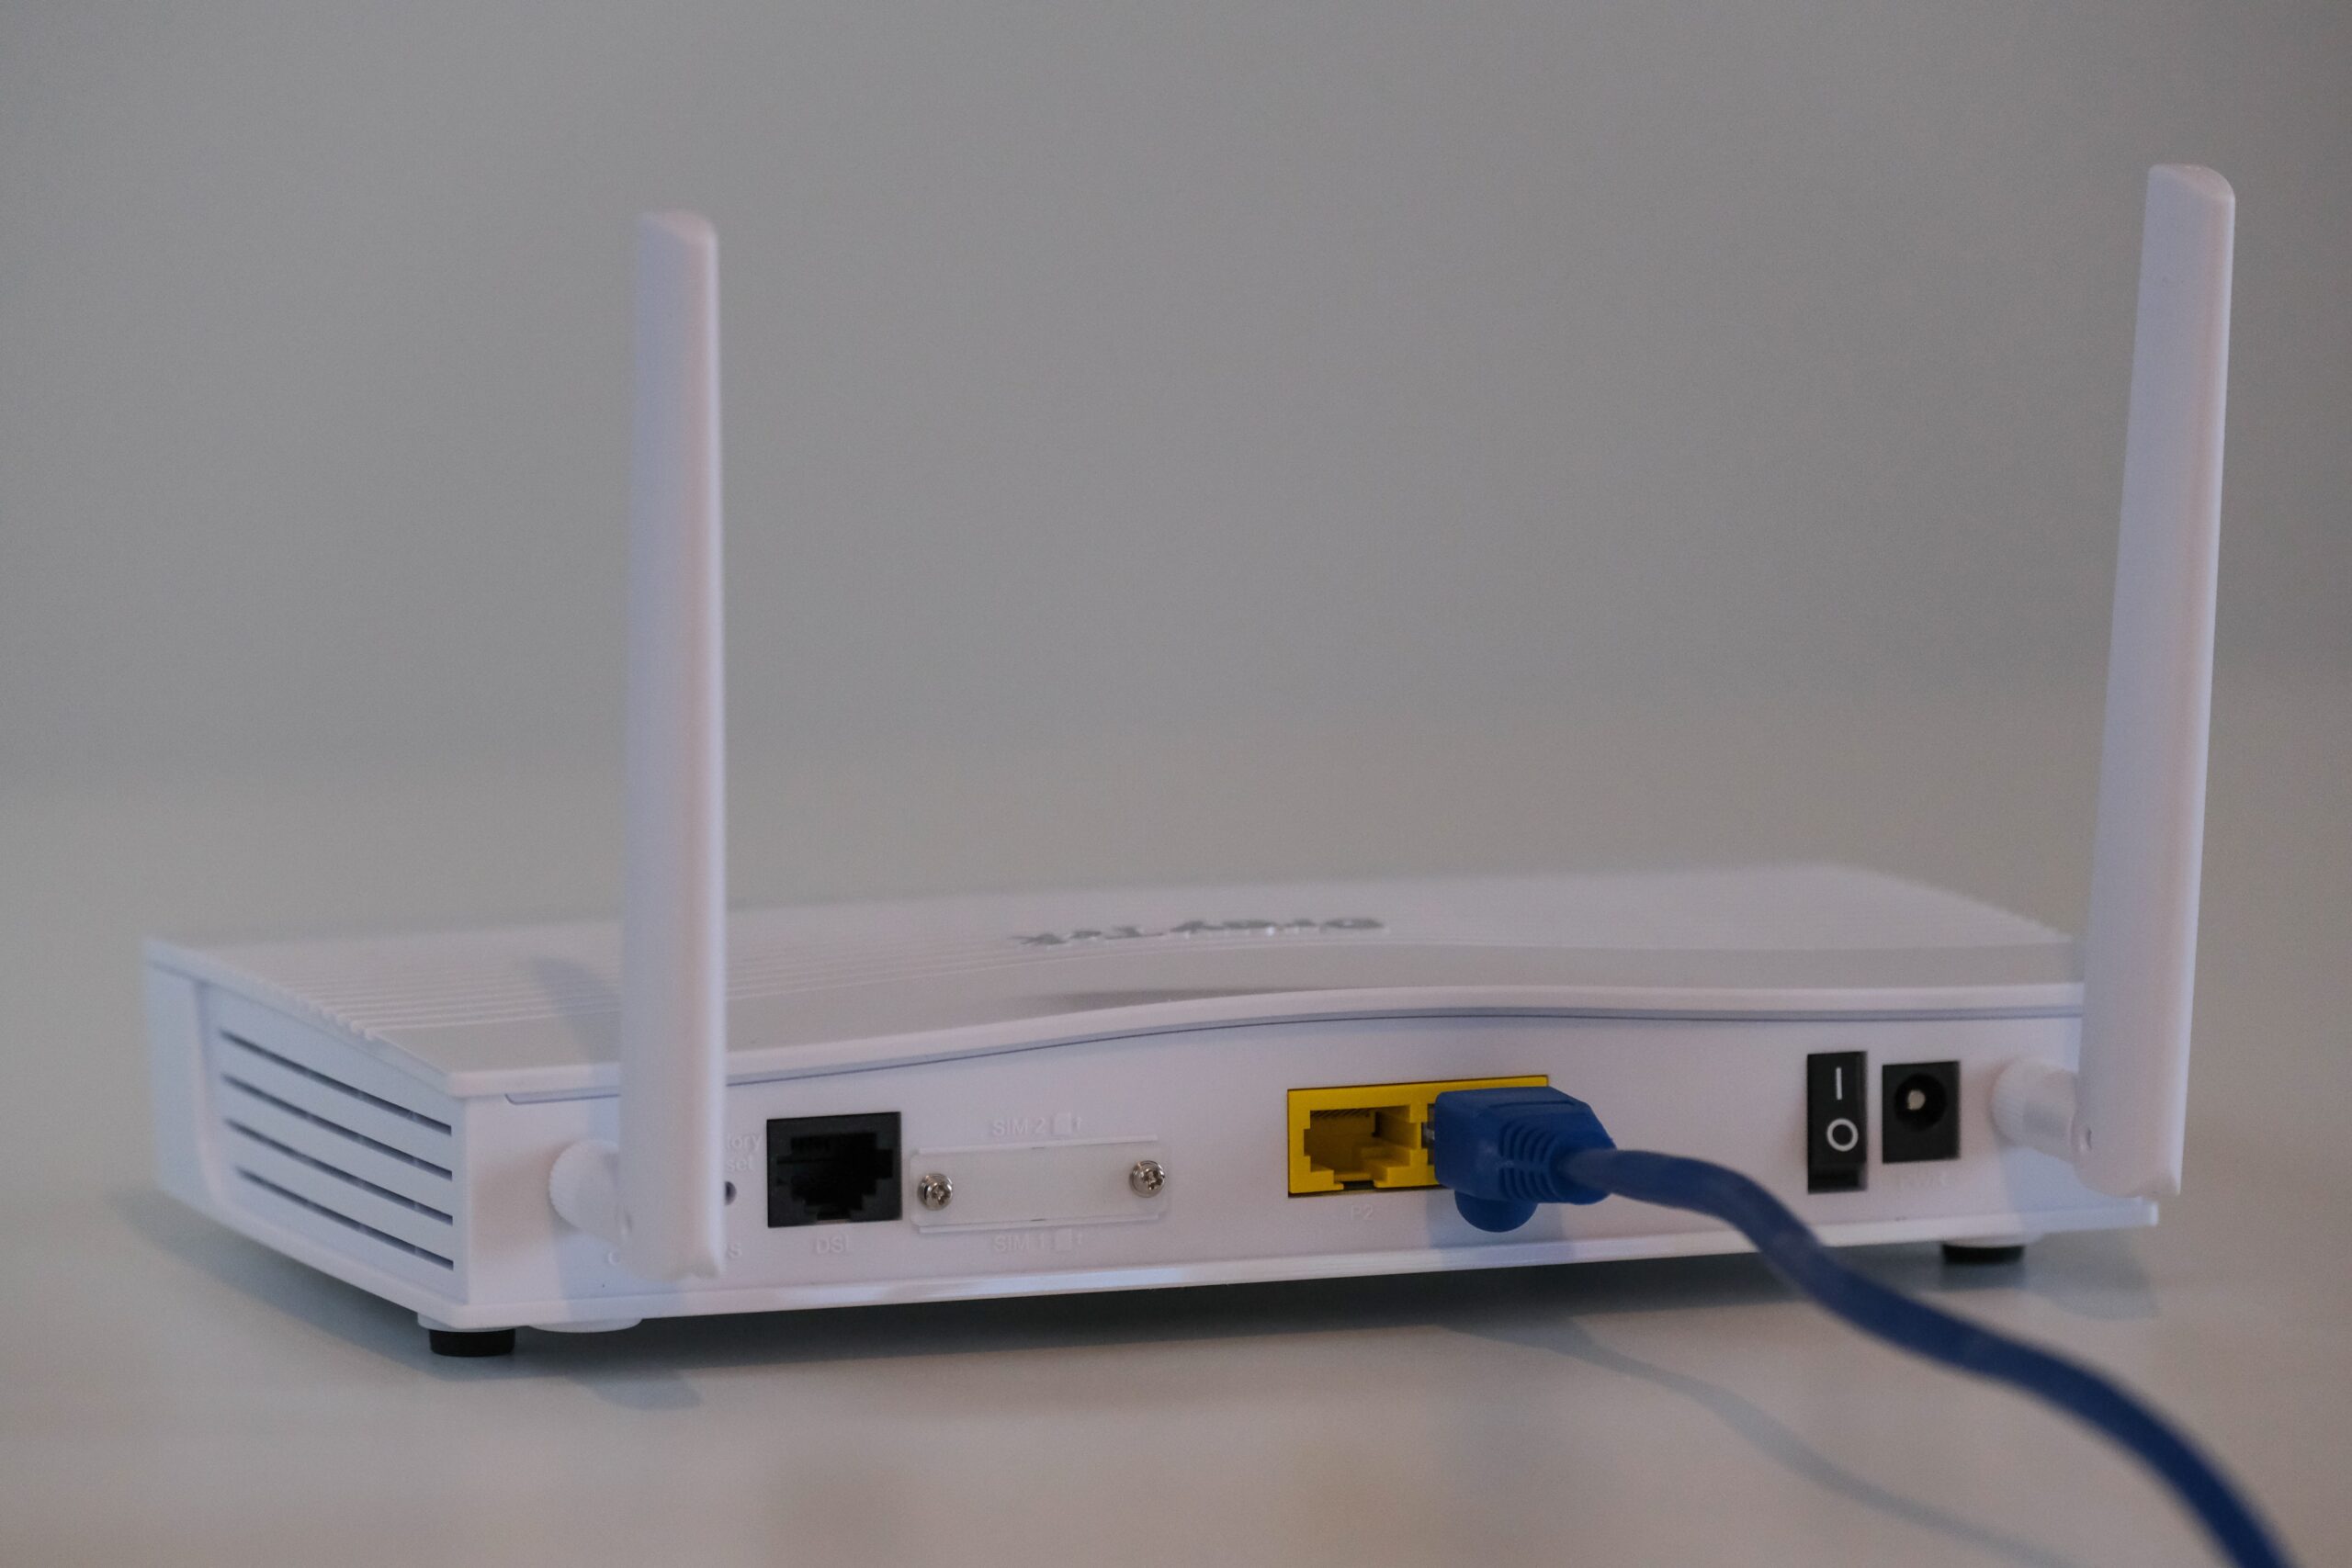 Does A Router Have To Be Connected To A Modem?